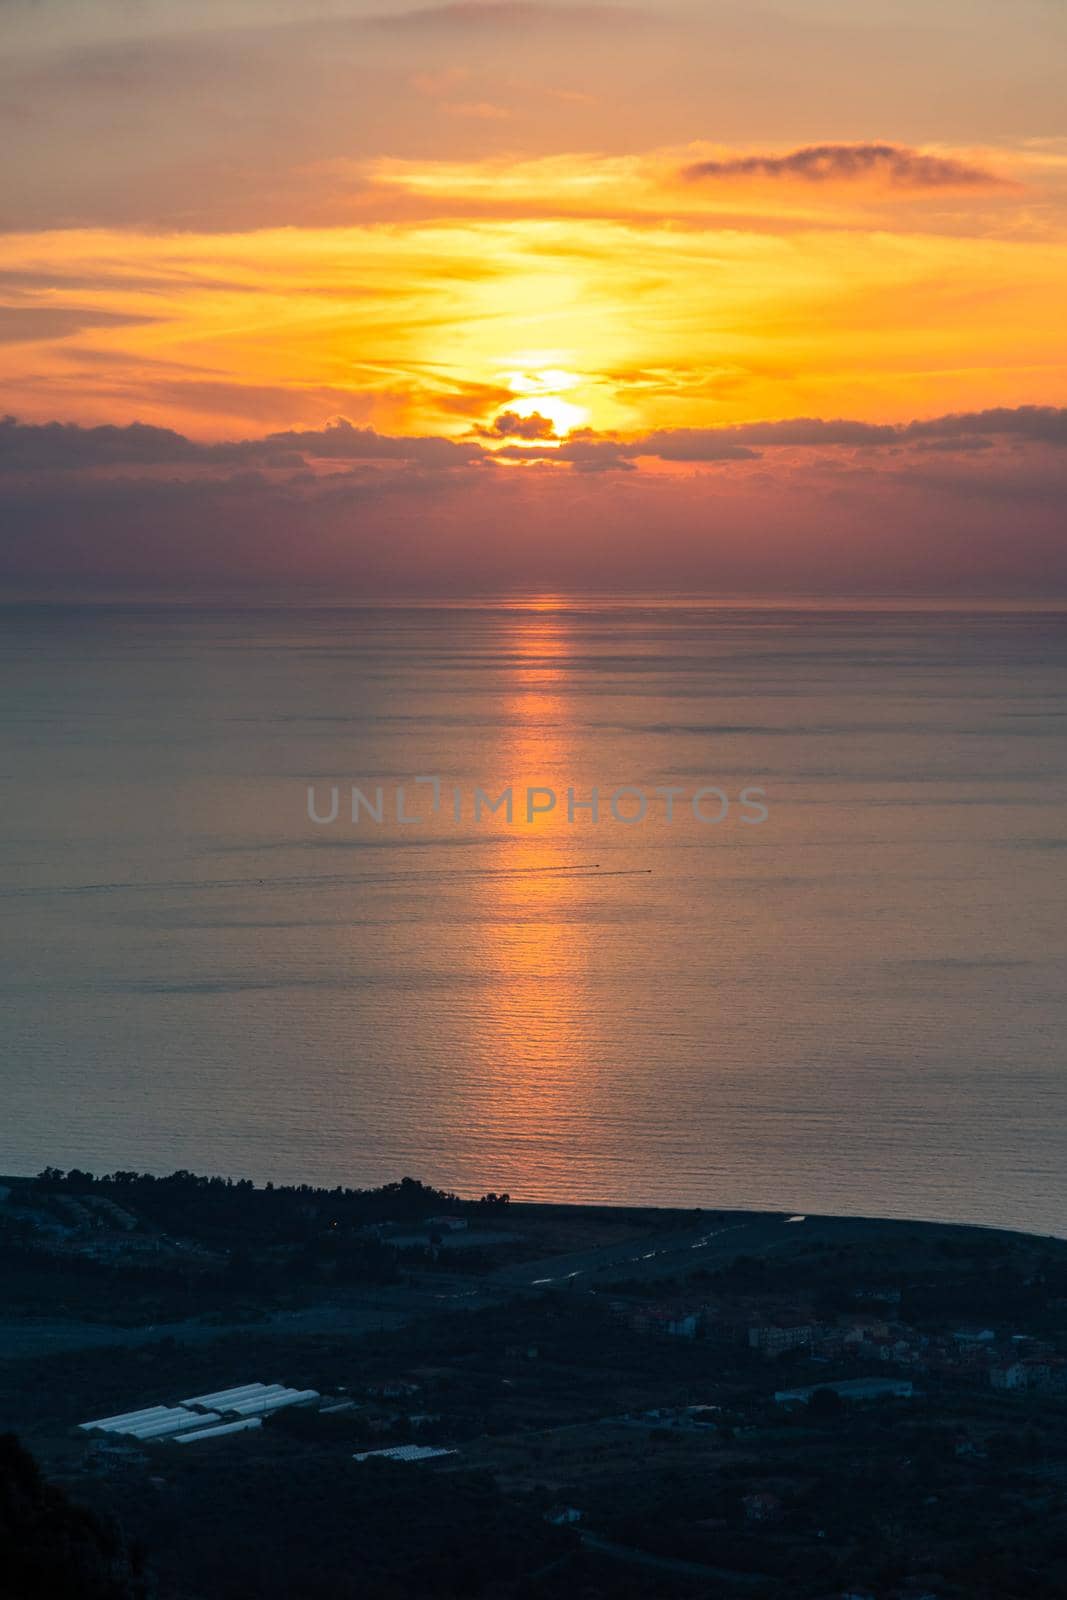 Sunset from San Marco D'Alunzio, Sicily, Italy by mauricallari